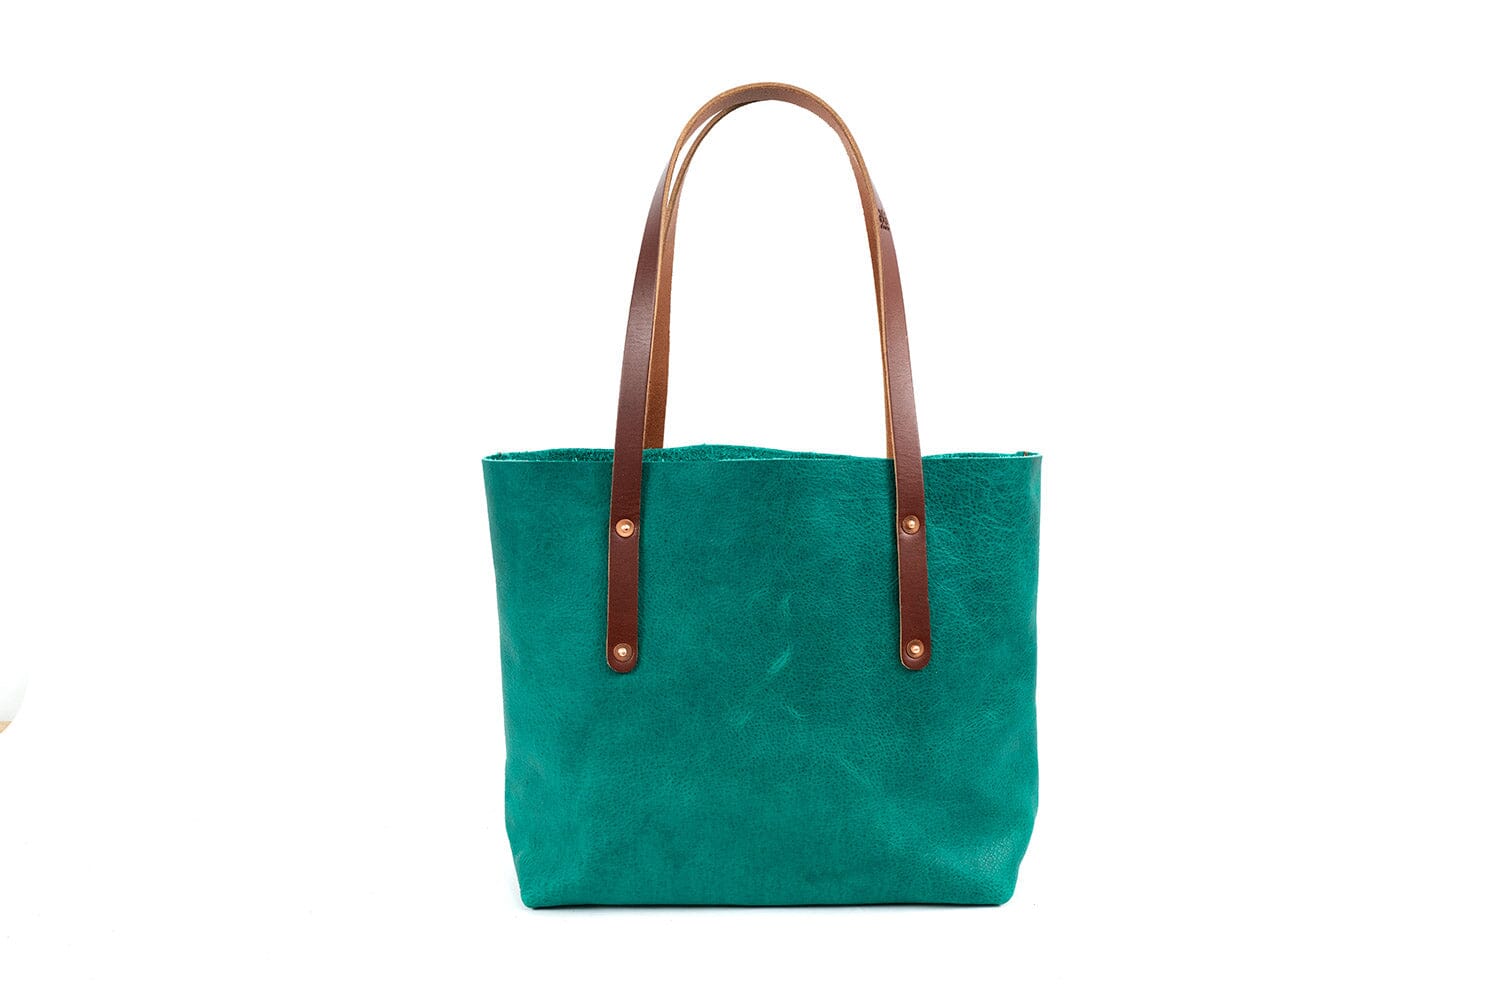 AVERY LEATHER TOTE BAG - SMALL - PINE GREEN BISON